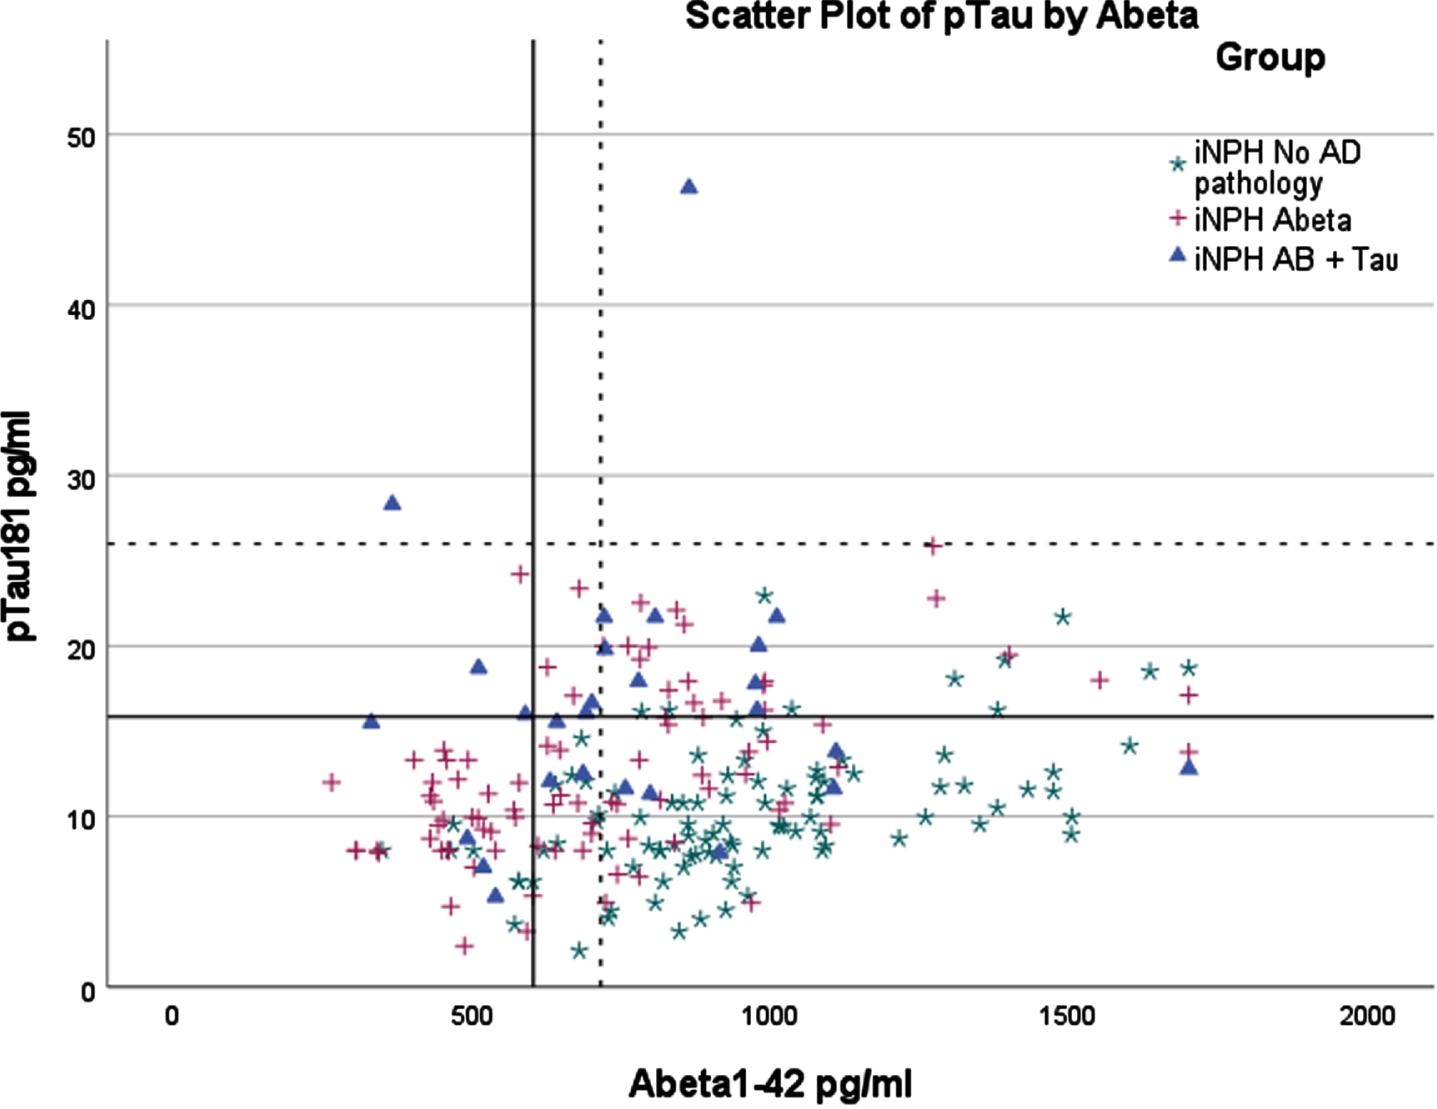 Scatterplot of P-Tau181 and Aβ1 - 42 with upper left quadrant indicating pathological values. pTau181, phosphorylated tau from lumbar sample; Abeta1-42, Aβ1 - 42 from lumbar sample. Axis values are in pg/ml. Continuous line indicates cutoff values with correction factor. Dotted line indicates cutoff values for general population.